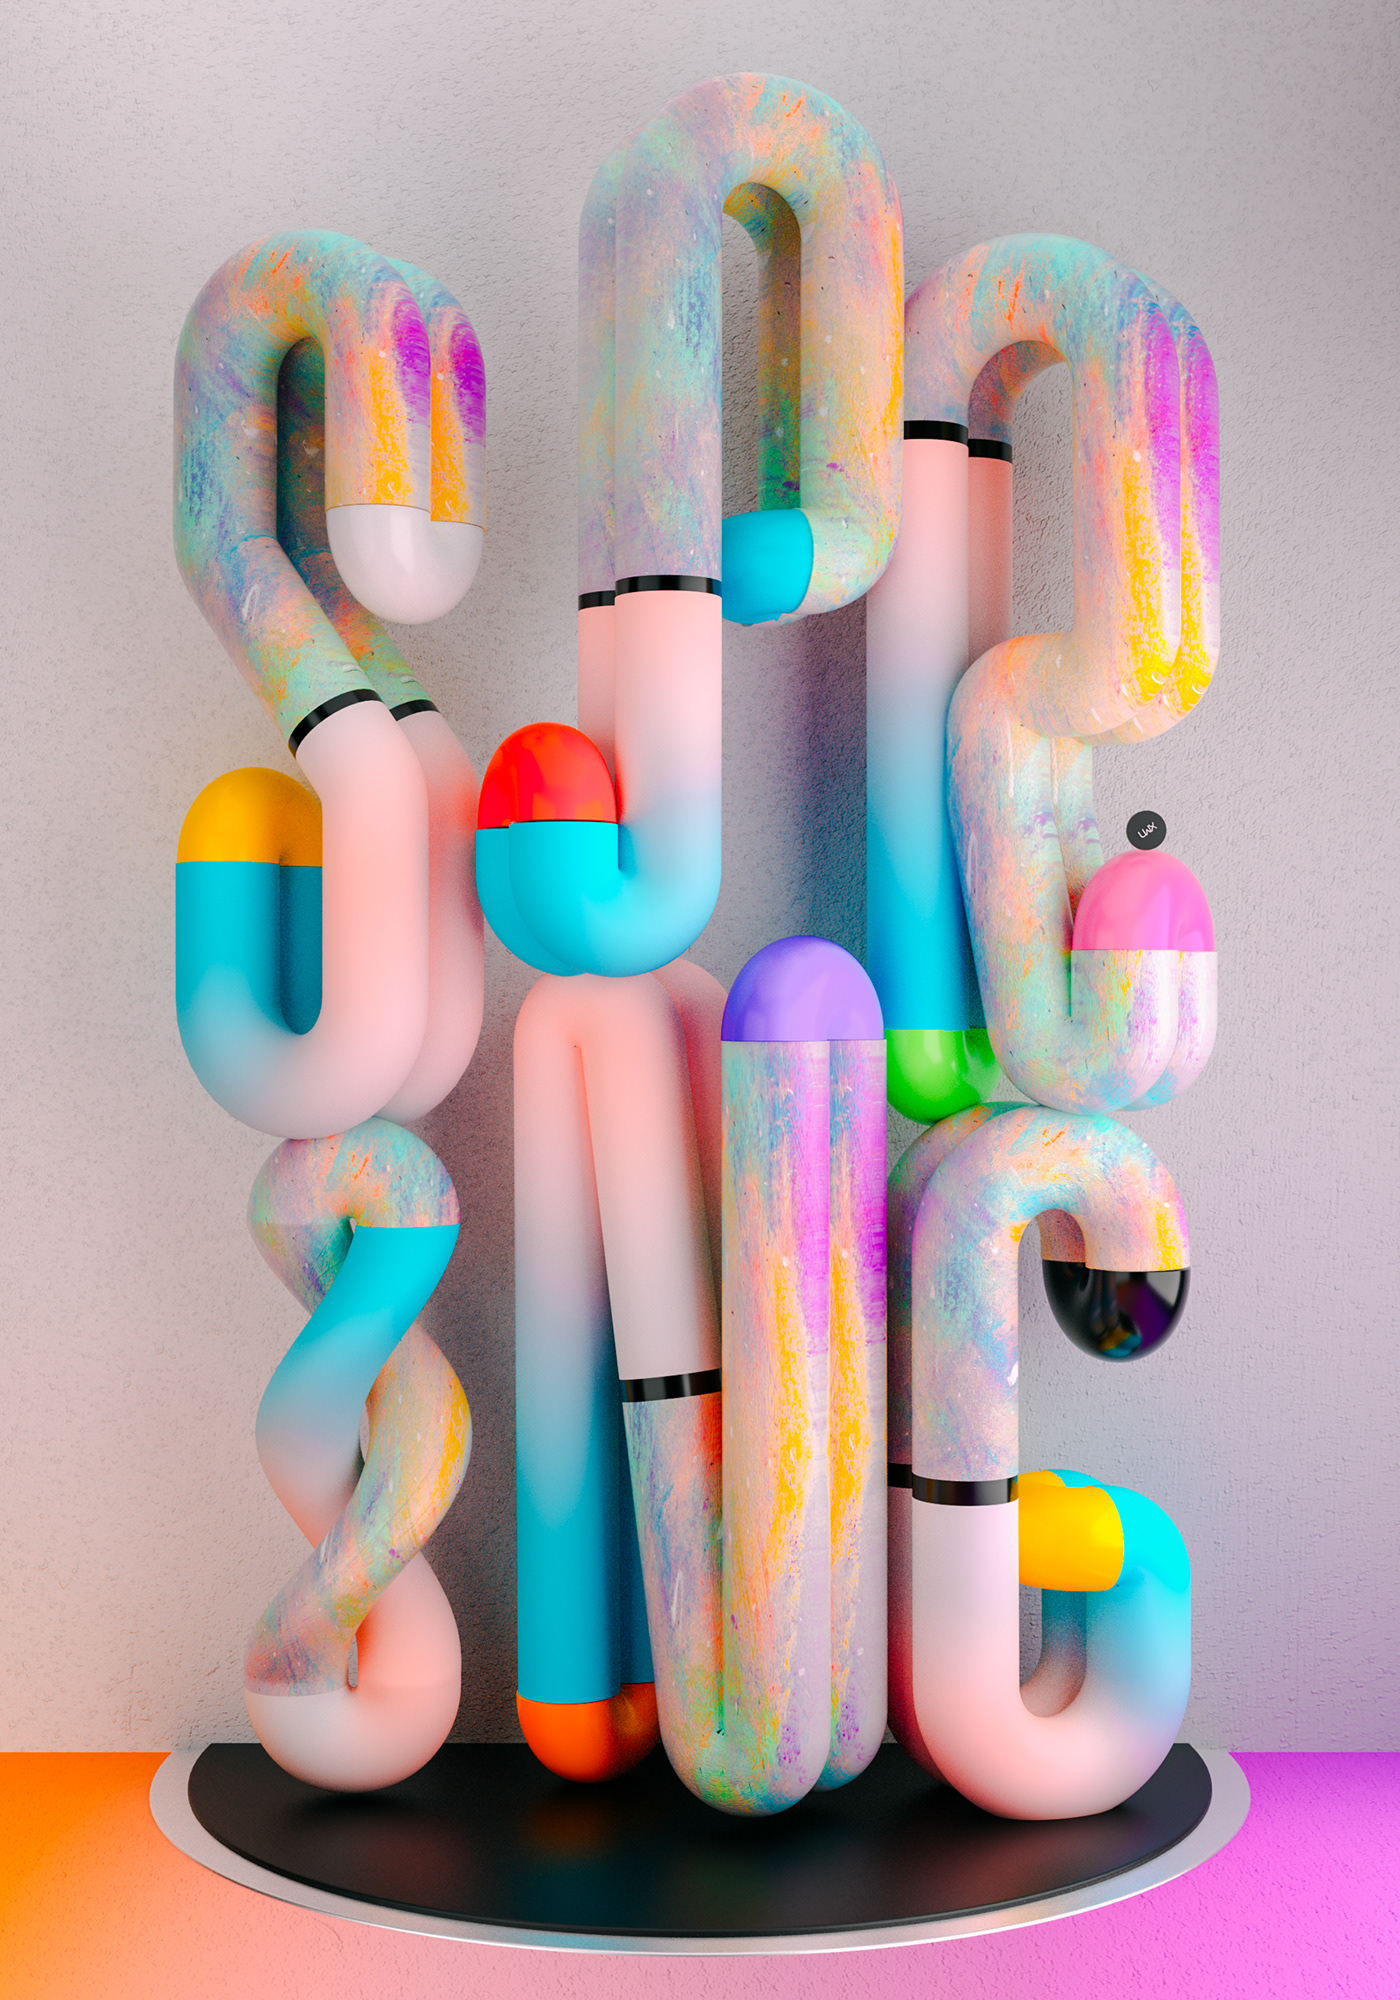 36daysoftype10 3dtypography 3Dillustration colorful acrylic watercolor 3dlettering